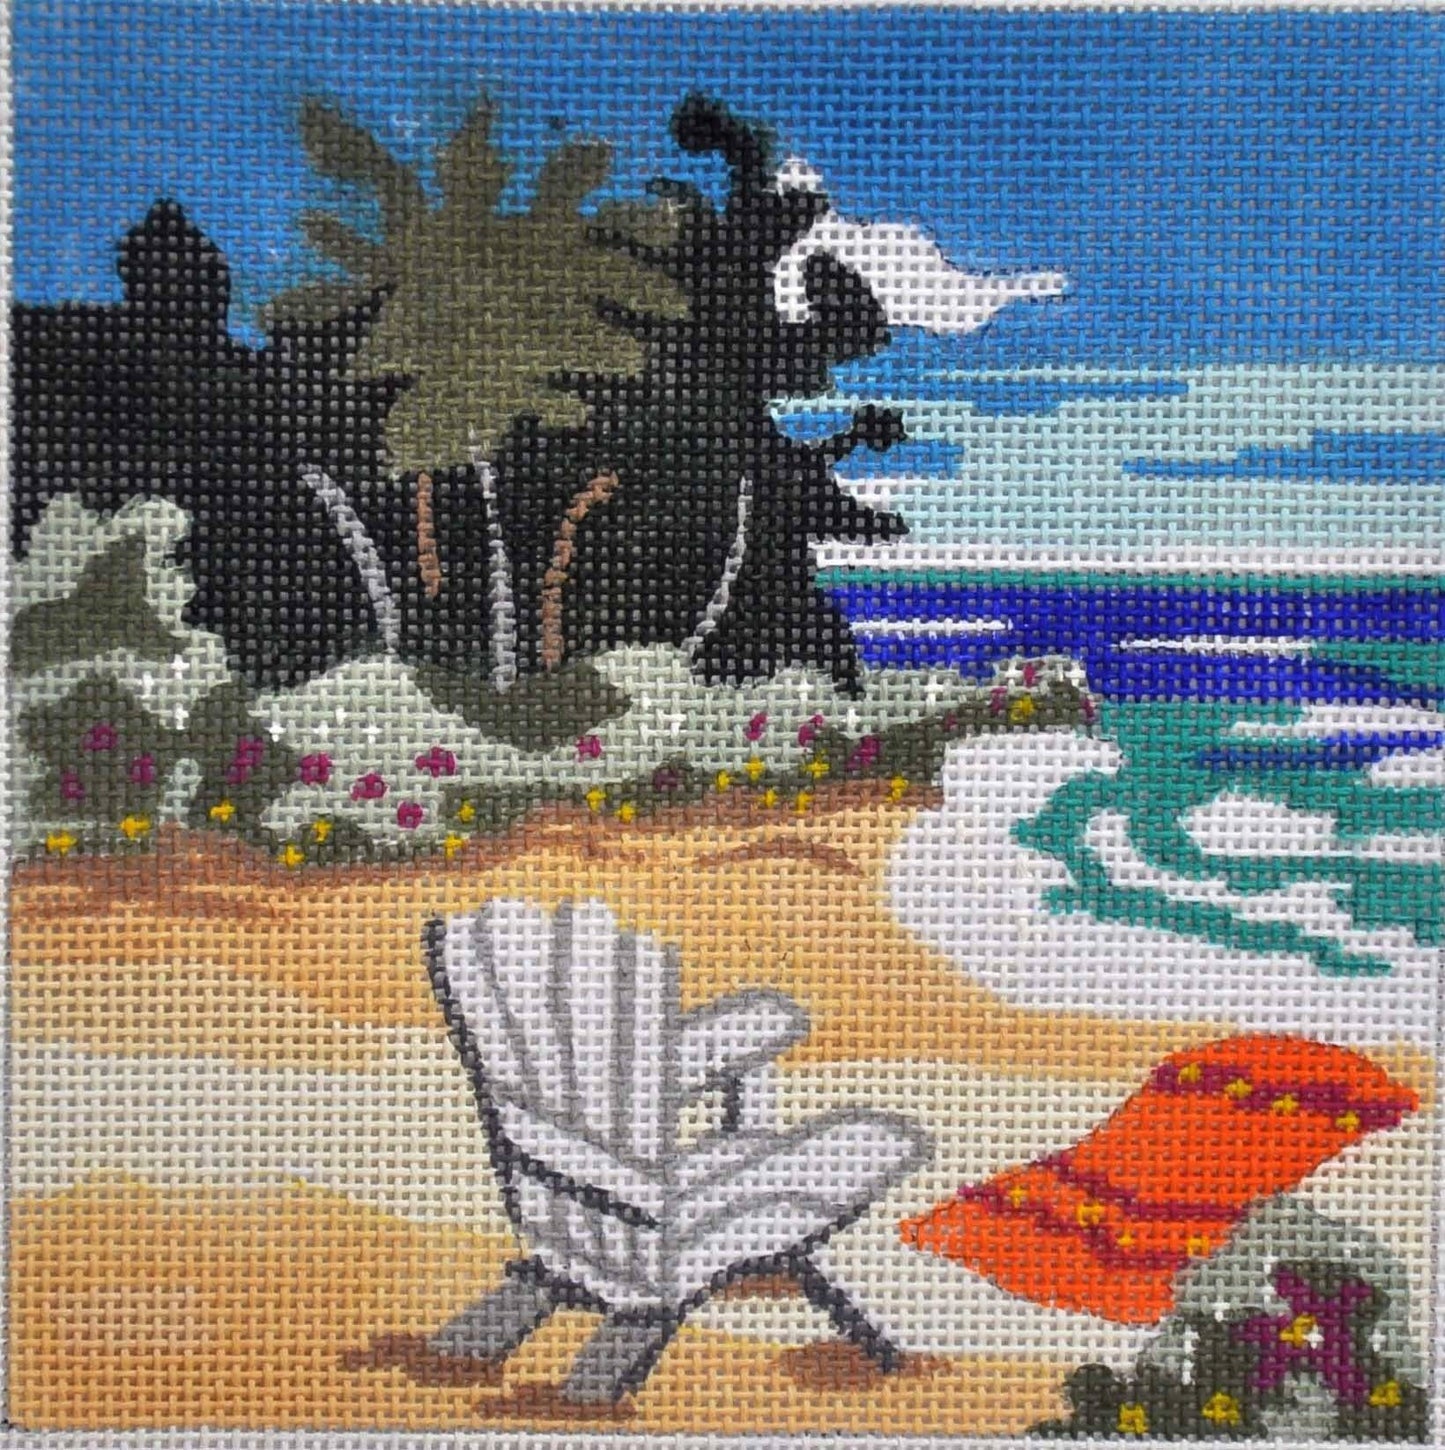 At the Beach Painted Canvas Julie Mar Needlepoint Designs 